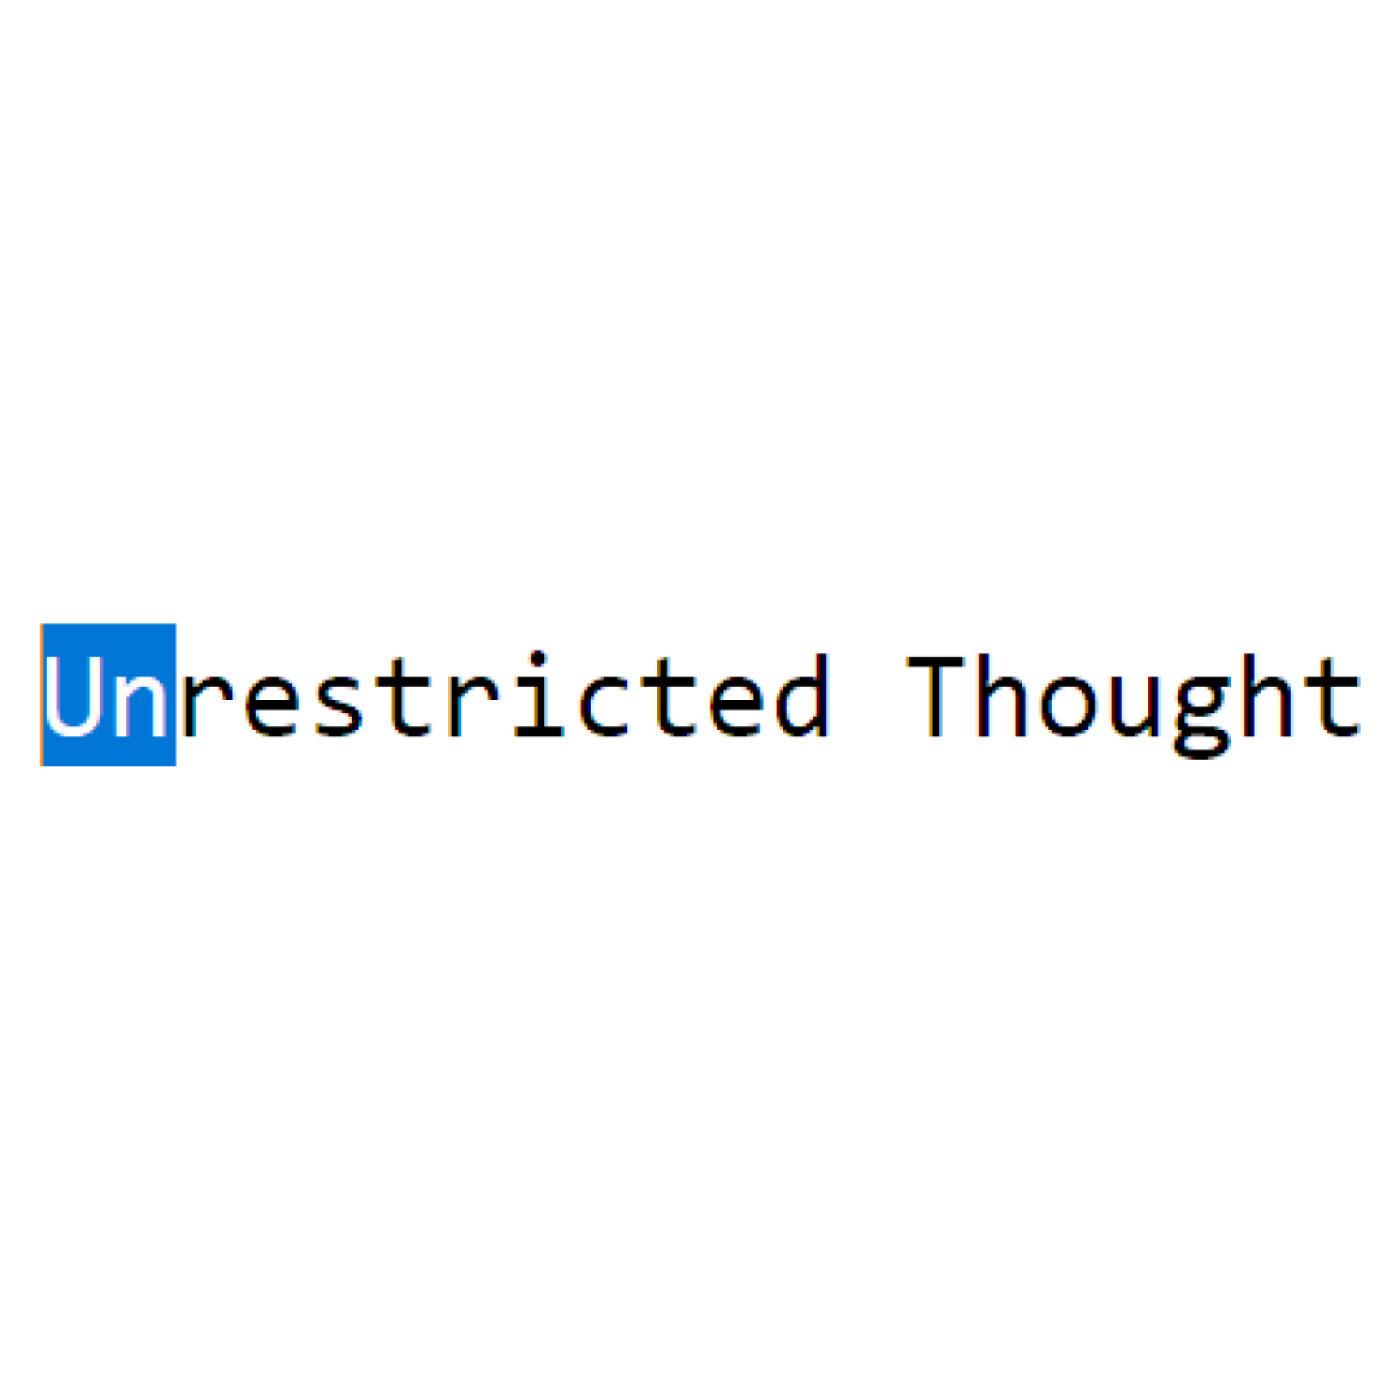 Unrestricted Thought